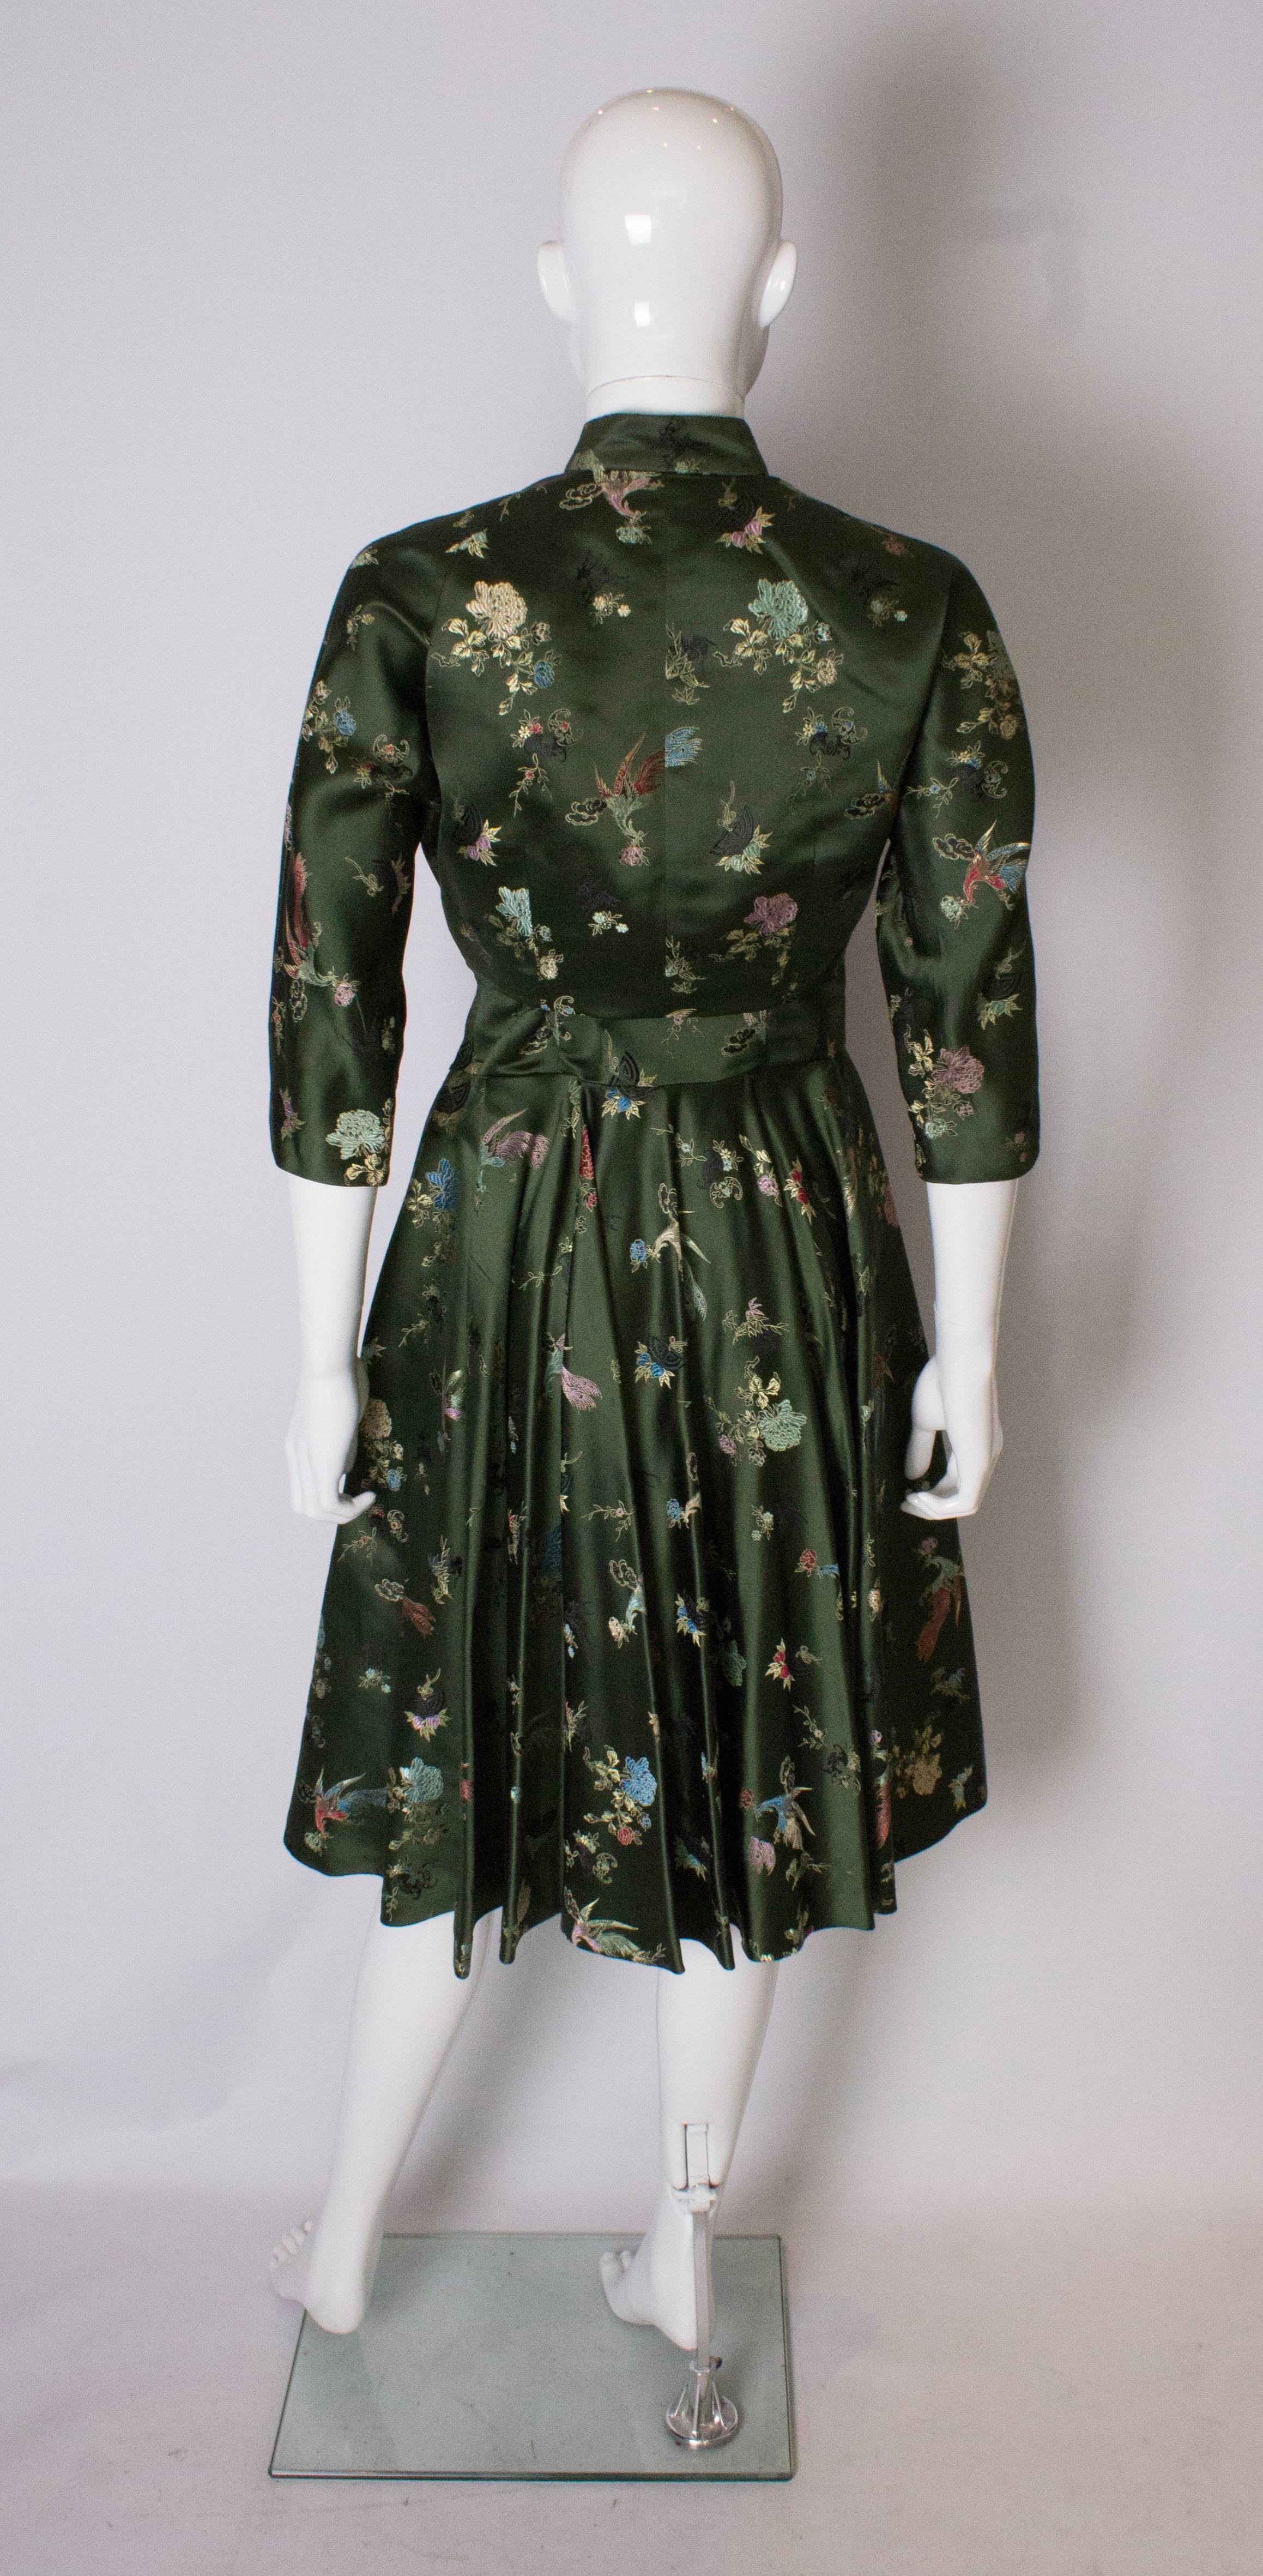 A Vintage 1950s Green Dress and Bolero Jacket by Butterick  For Sale 1